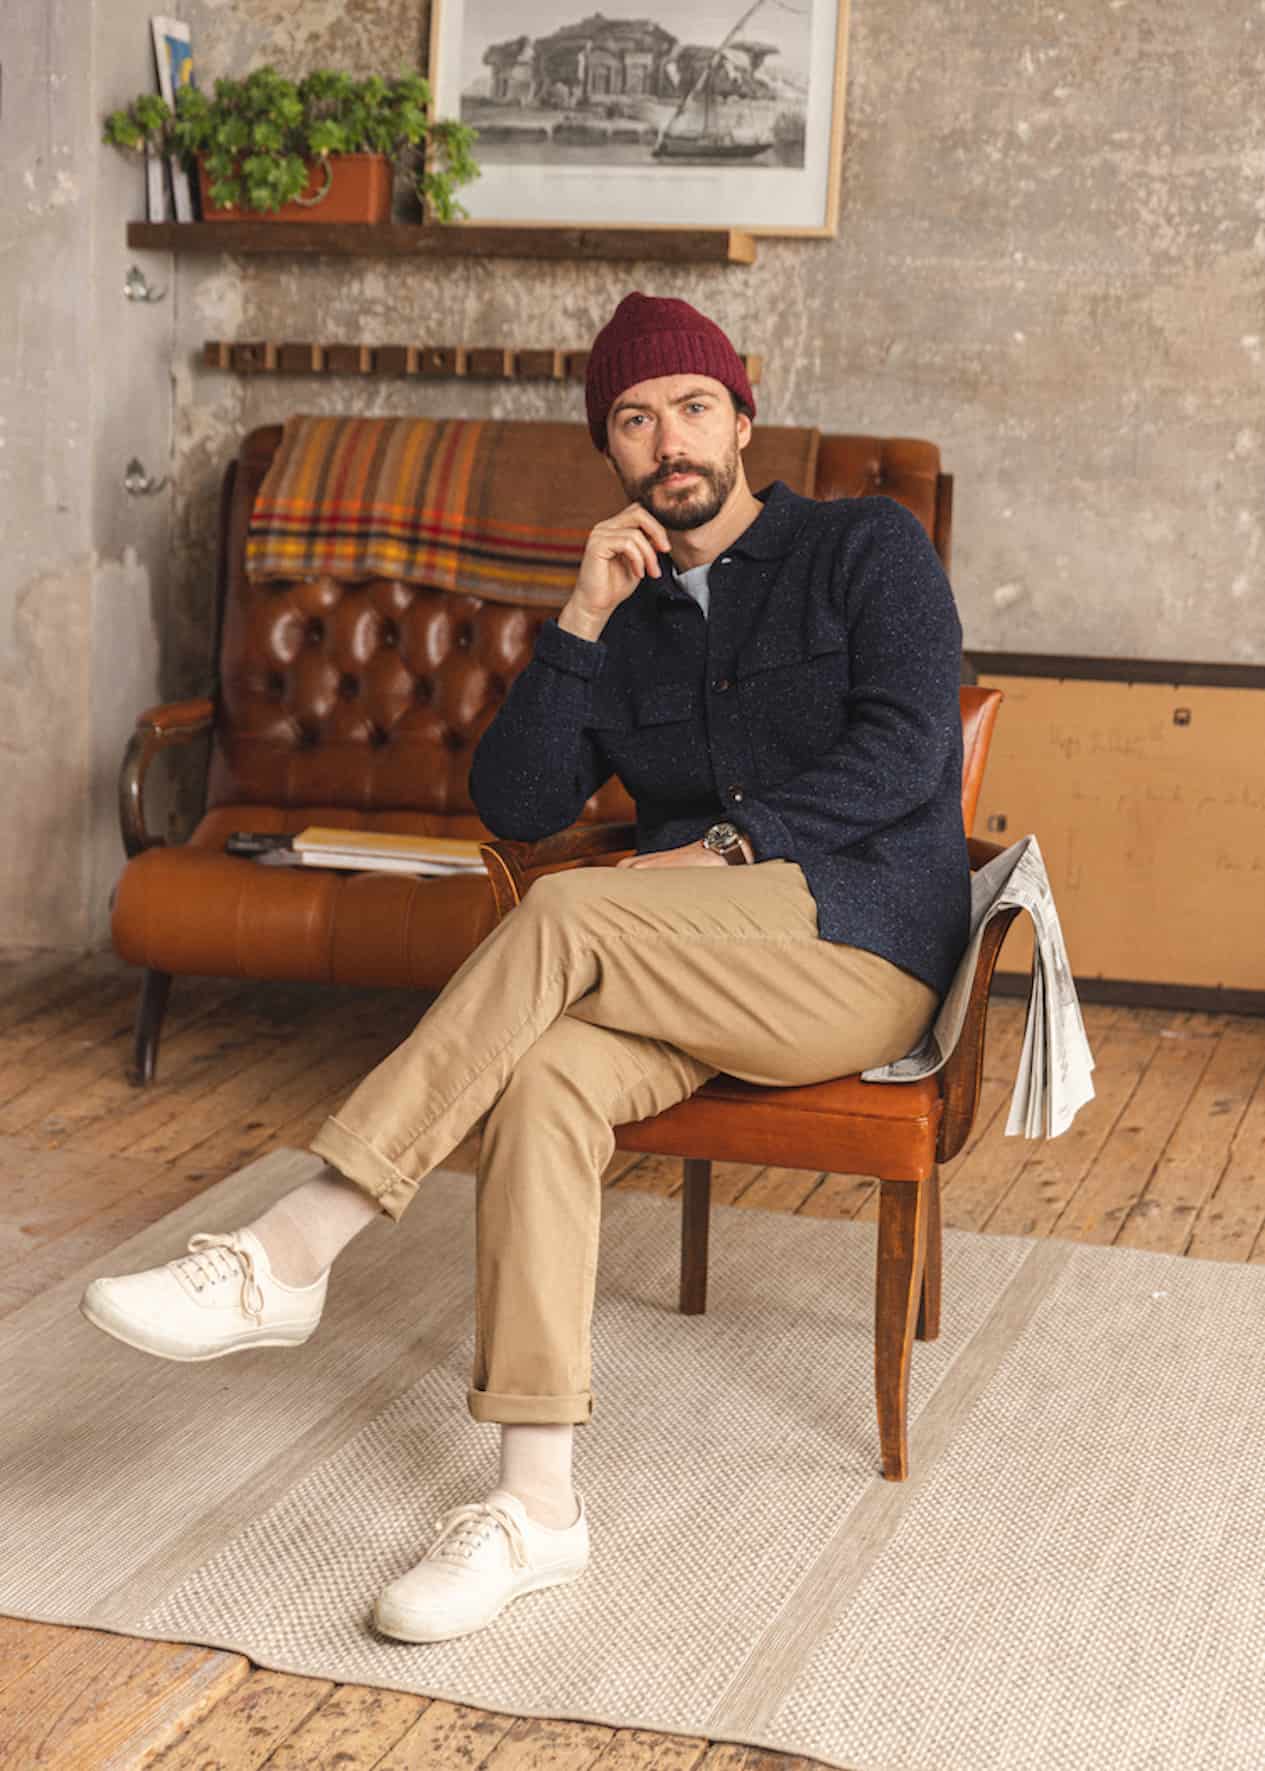 image of a man sitting in a chair wearing khaki pants, white sneakers, a navy blue flannel shirt and a red toque